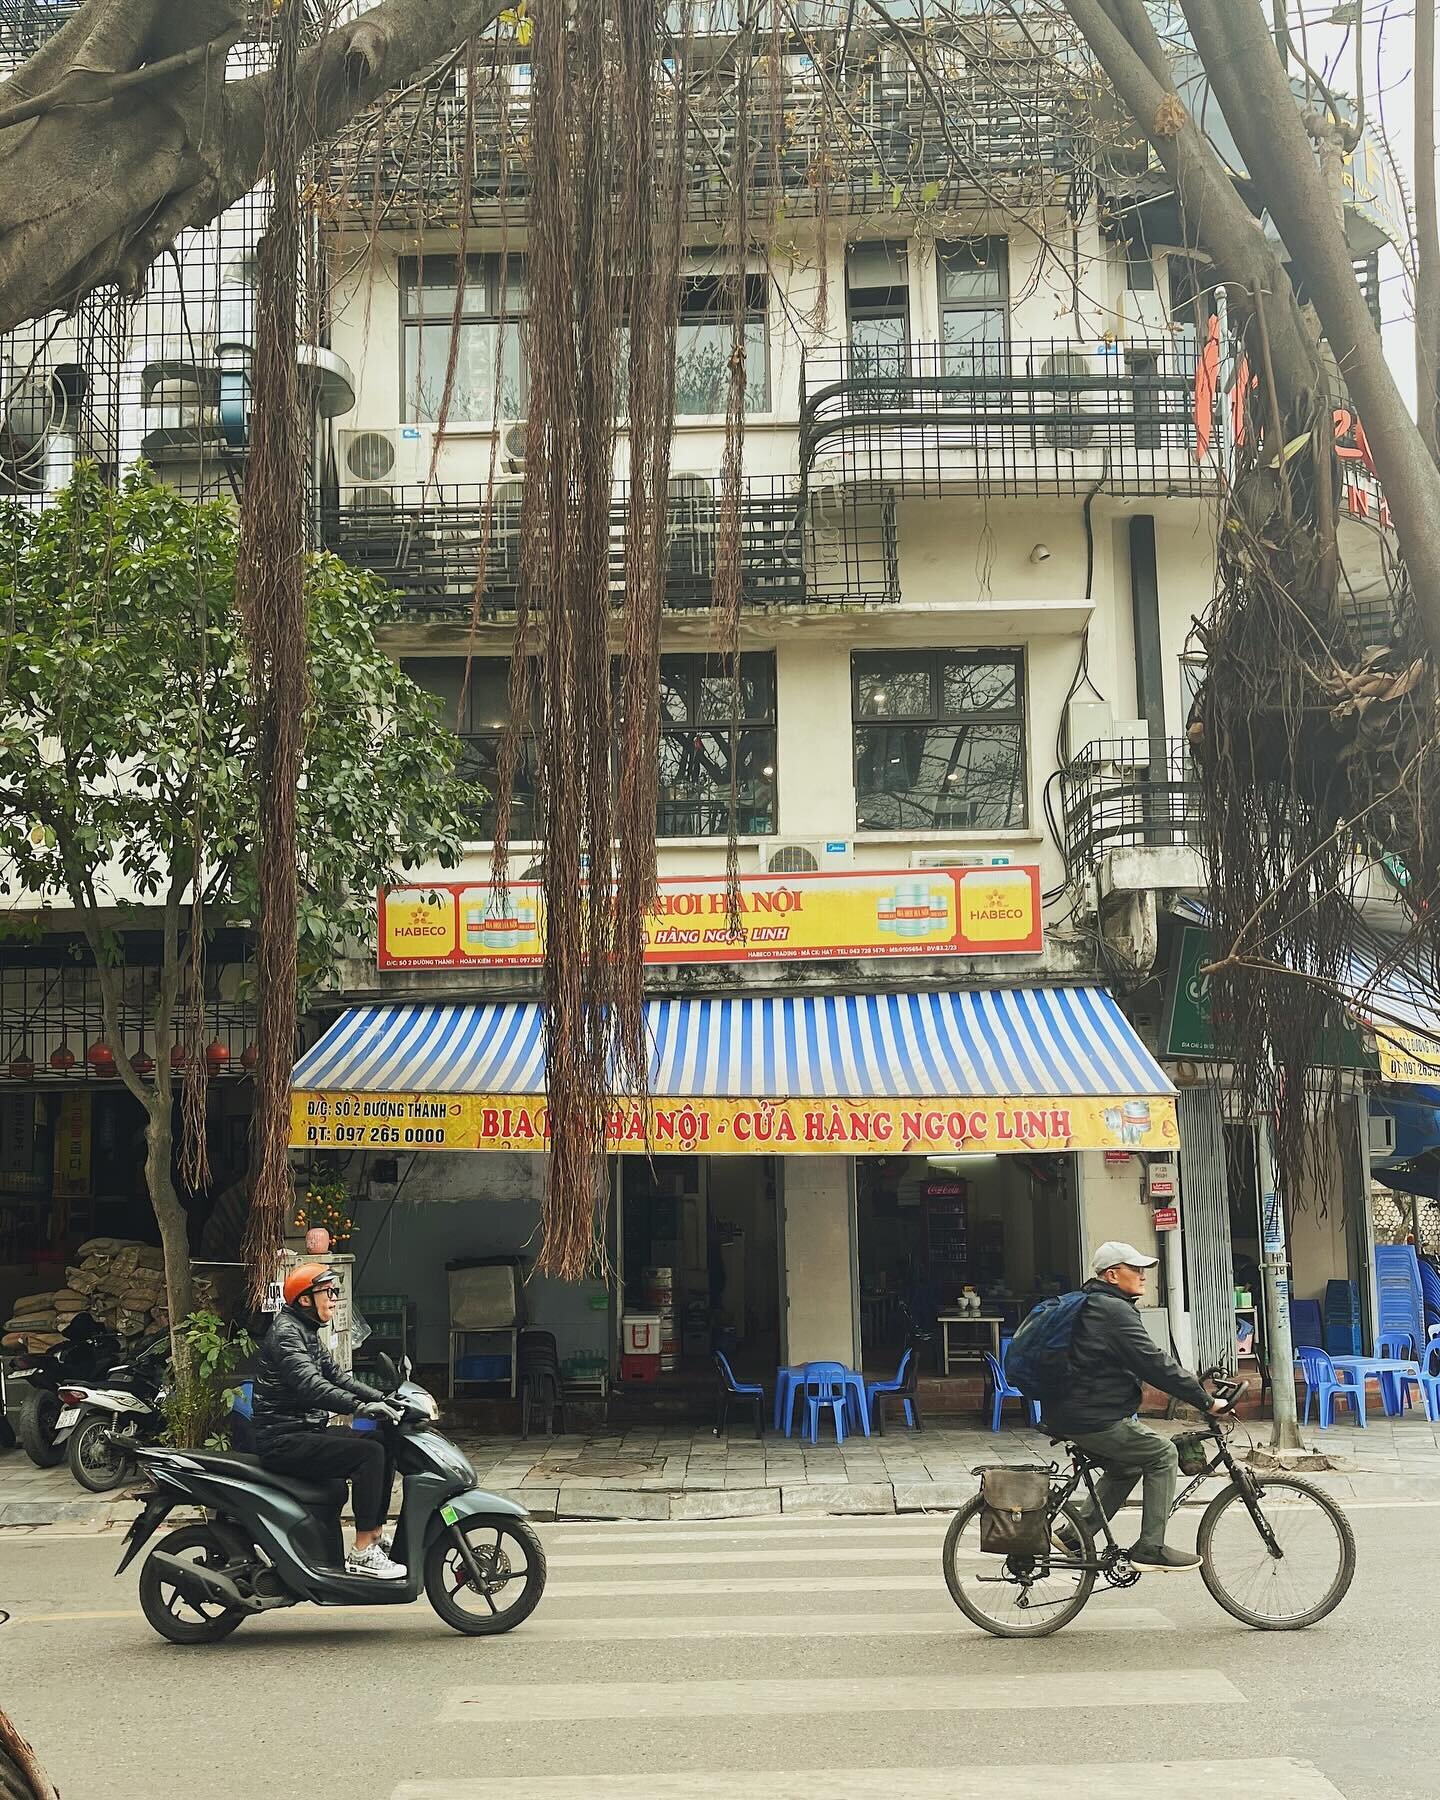 👂 Overheard in Hanoi - snippets from our guides that stood out to me/painted a picture of the city&rsquo;s past and present ties with the West and its move away from socialism. 
- &ldquo;My grandparents had to learn French, my parents had to learn R